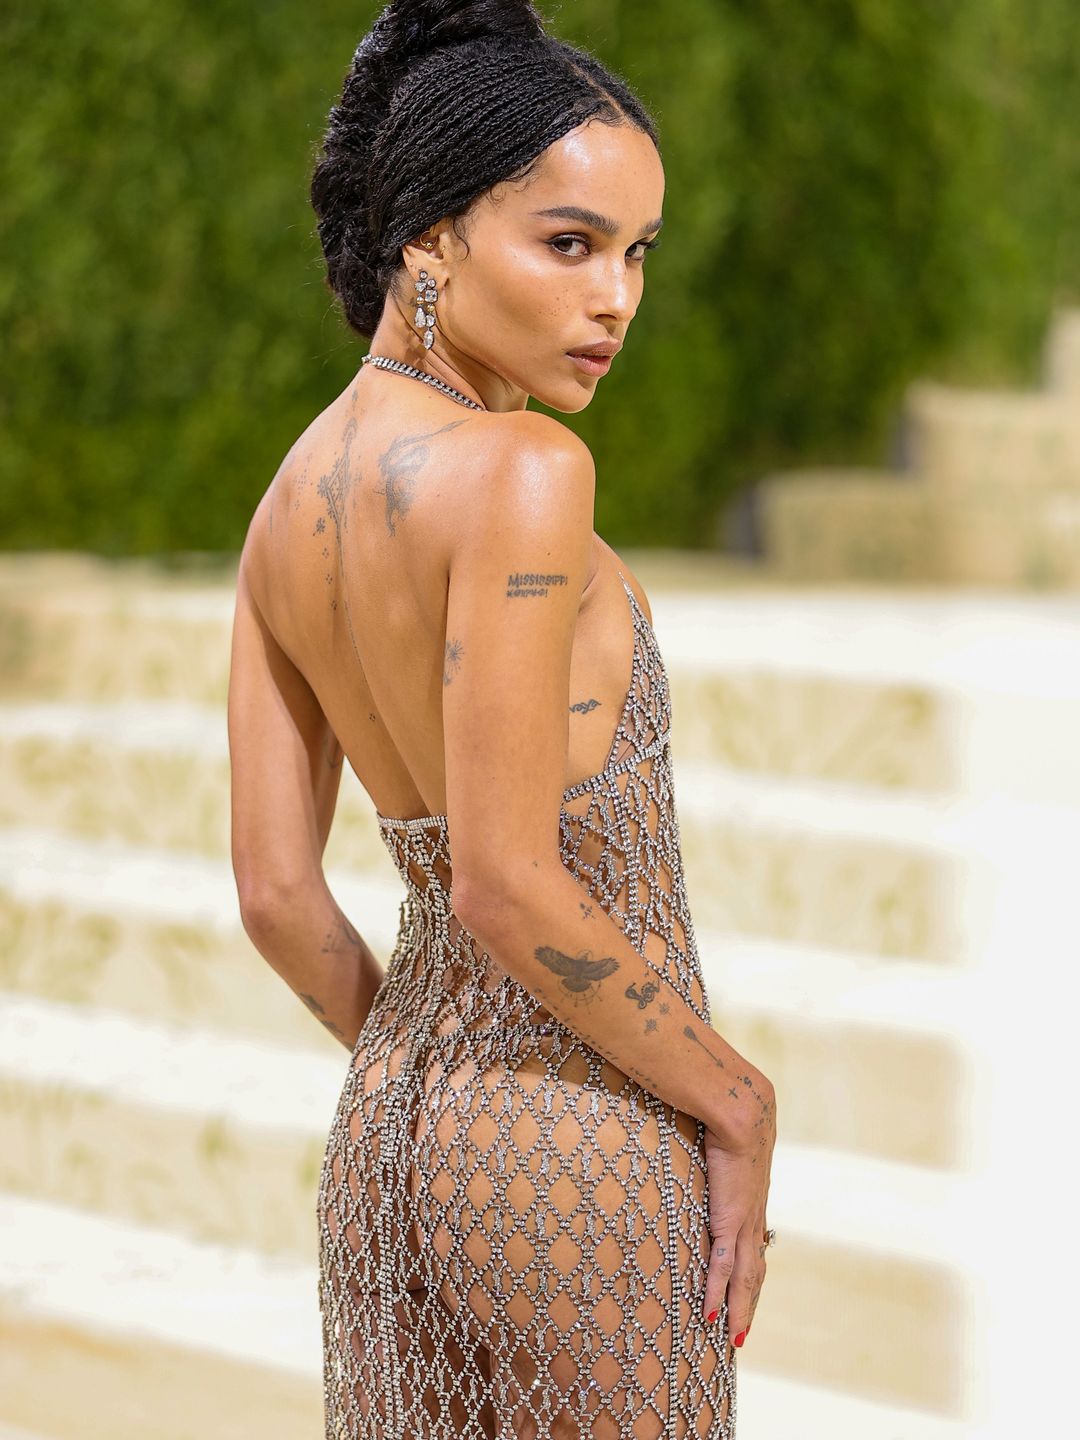 Zoe Kravitz attends The 2021 Met Gala Celebrating In America: A Lexicon Of Fashion at Metropolitan Museum of Art on September 13, 2021